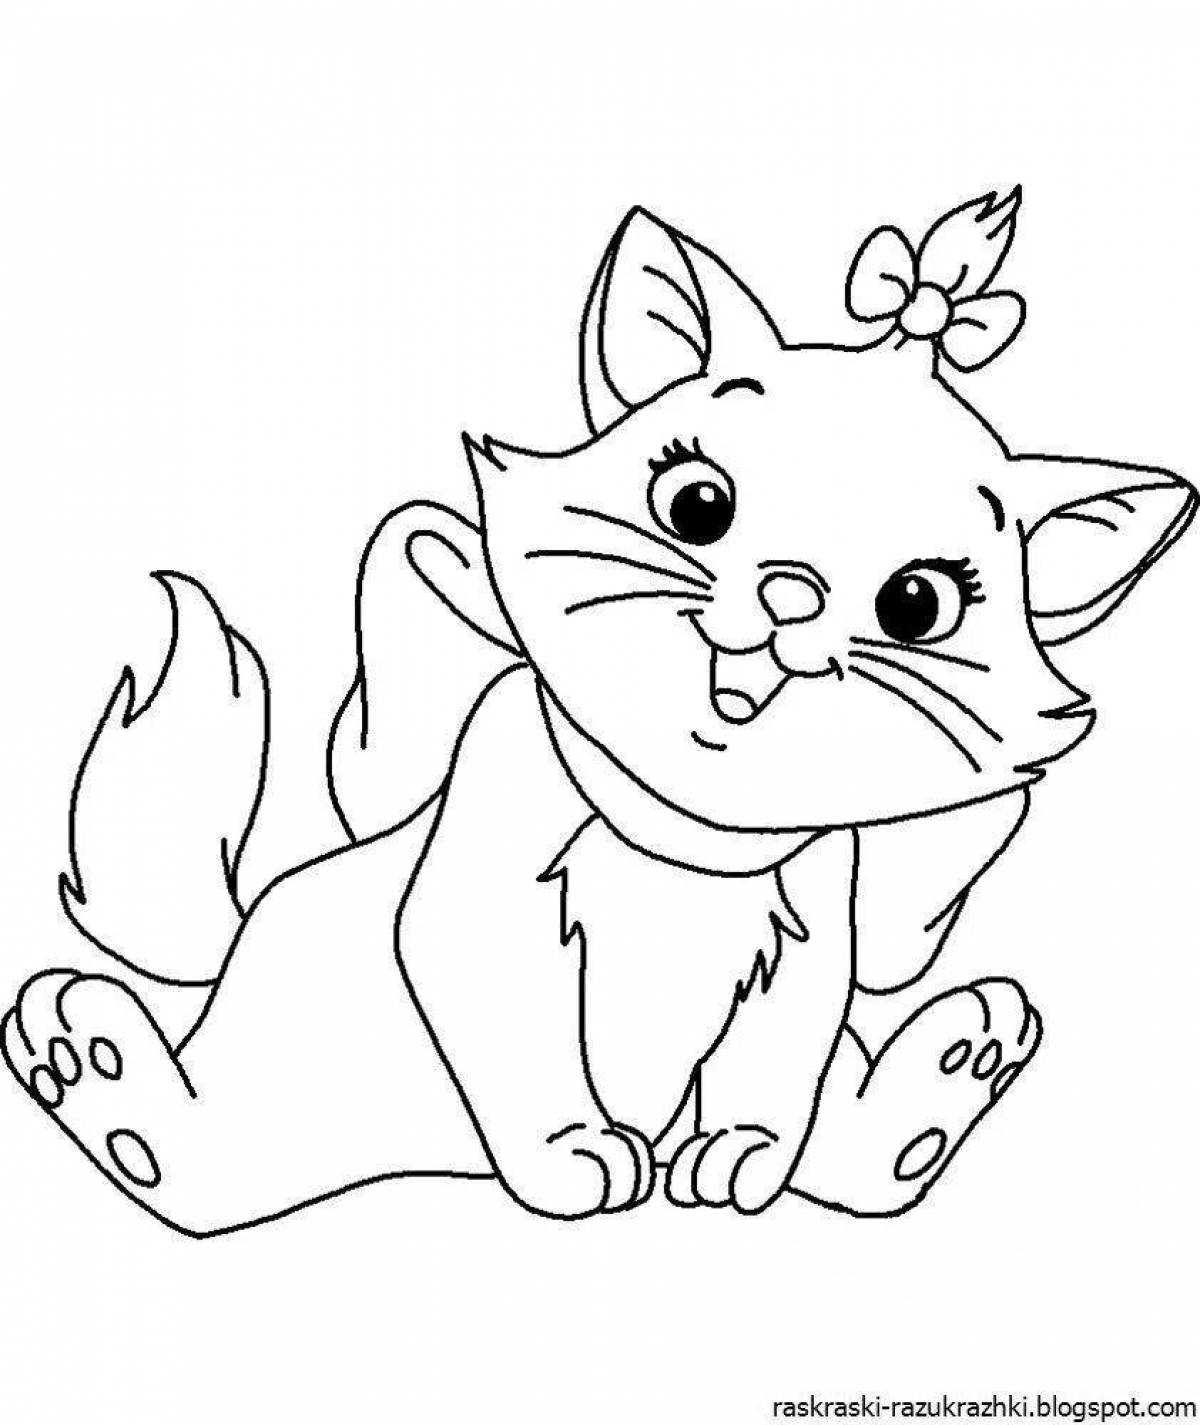 Colorful kittens coloring book for children 6-7 years old